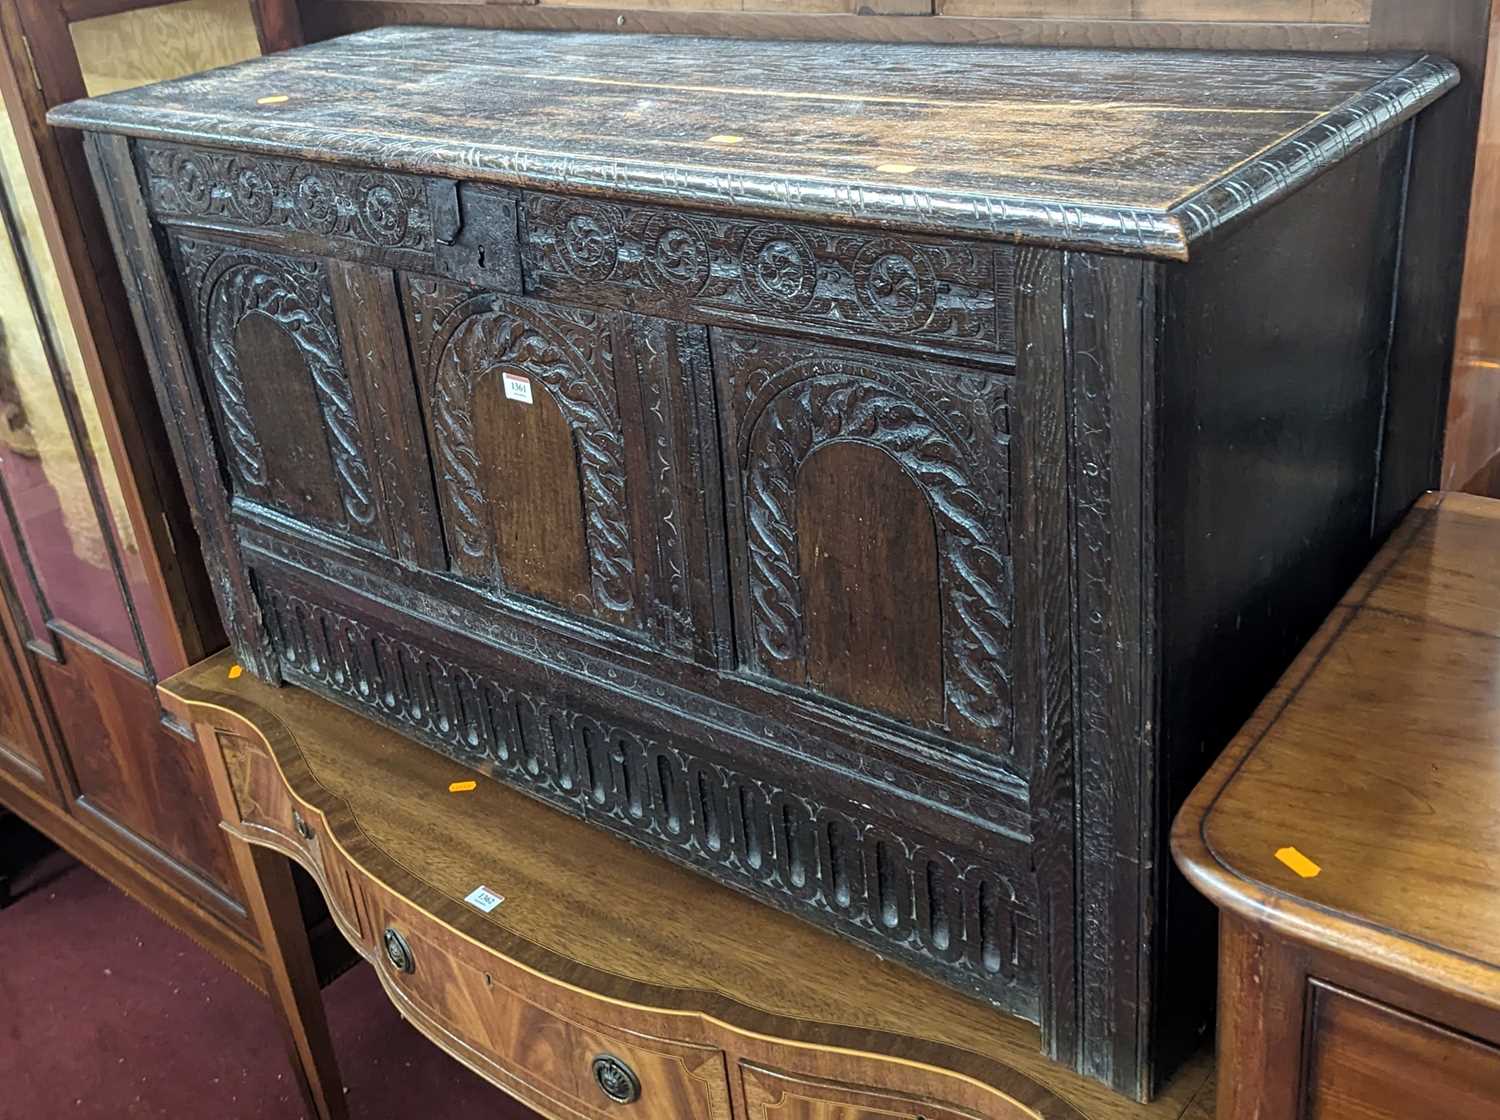 An 18th century joined oak three-panel hinge topped coffer, having later floral relief carved